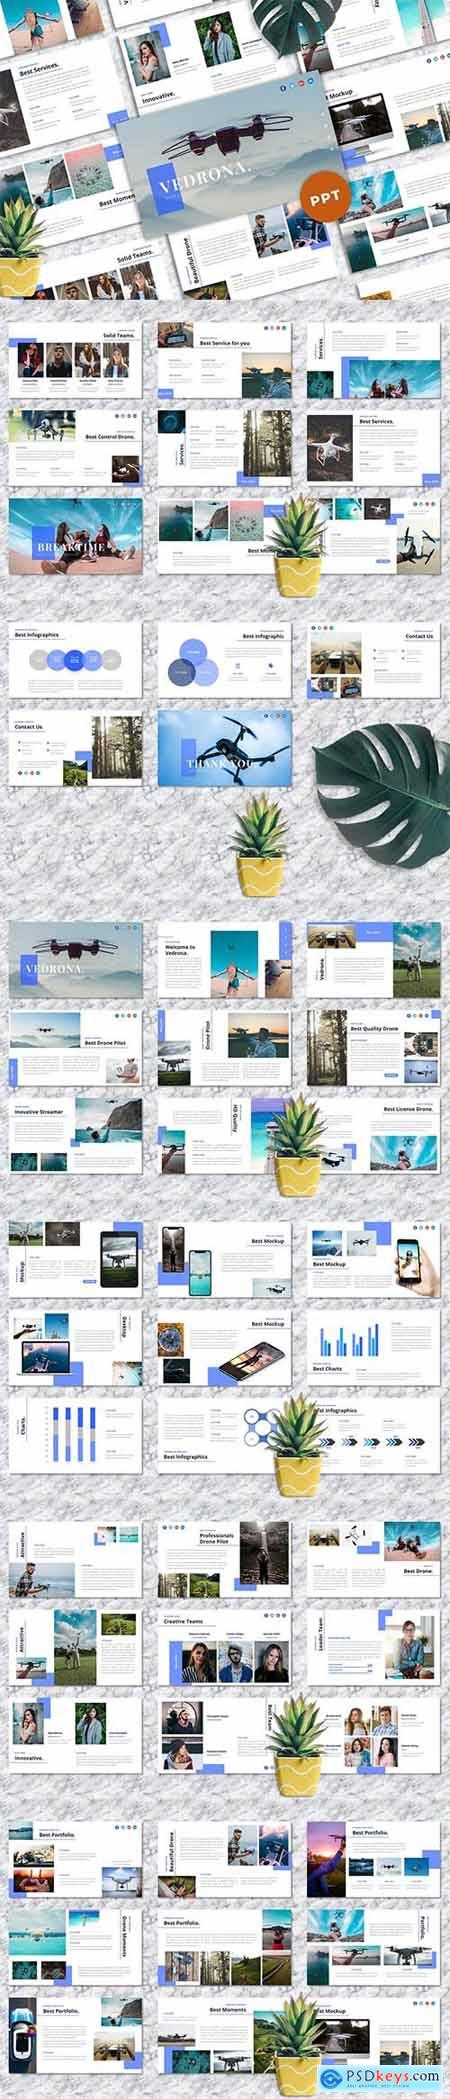 Vedrona - Drone & Photography PowerPoint Template